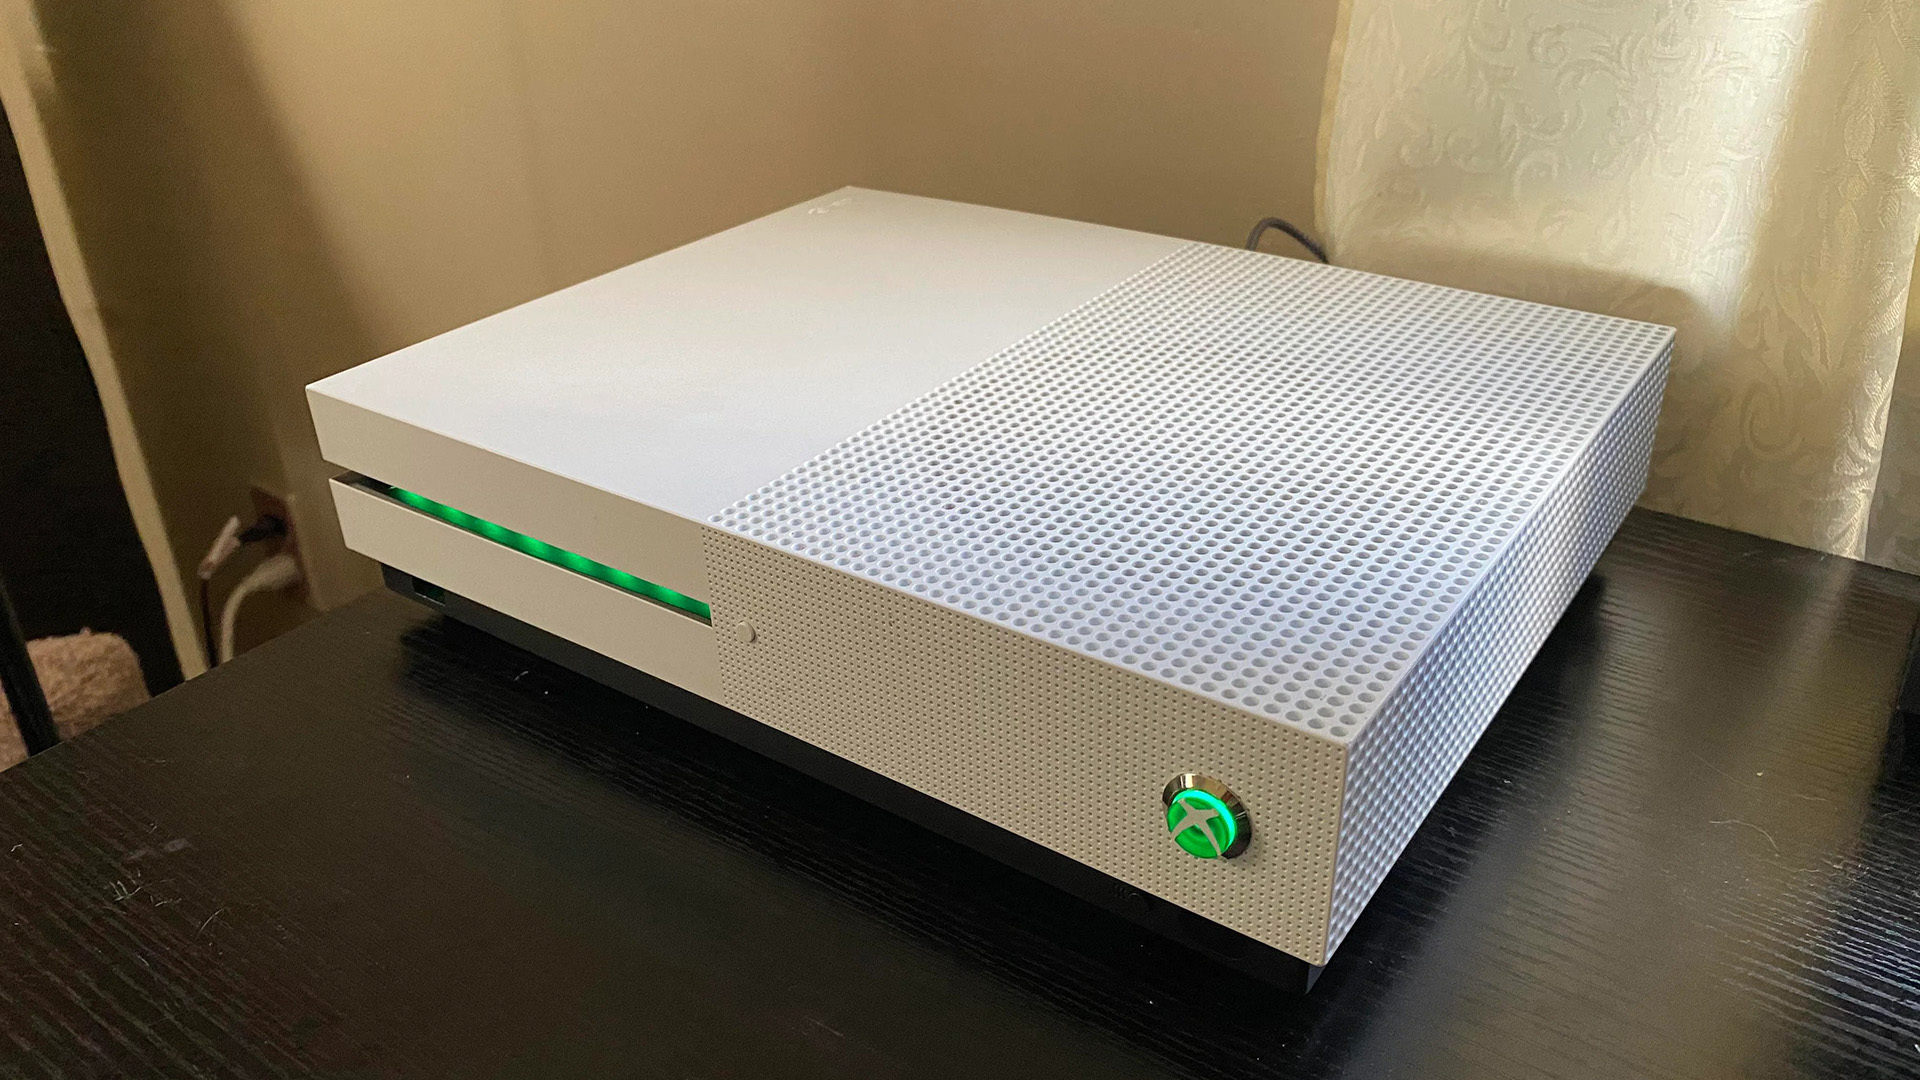 Forget the Xbox Series S, someone’s shoved a PC into an Xbox One S | PCGamesN